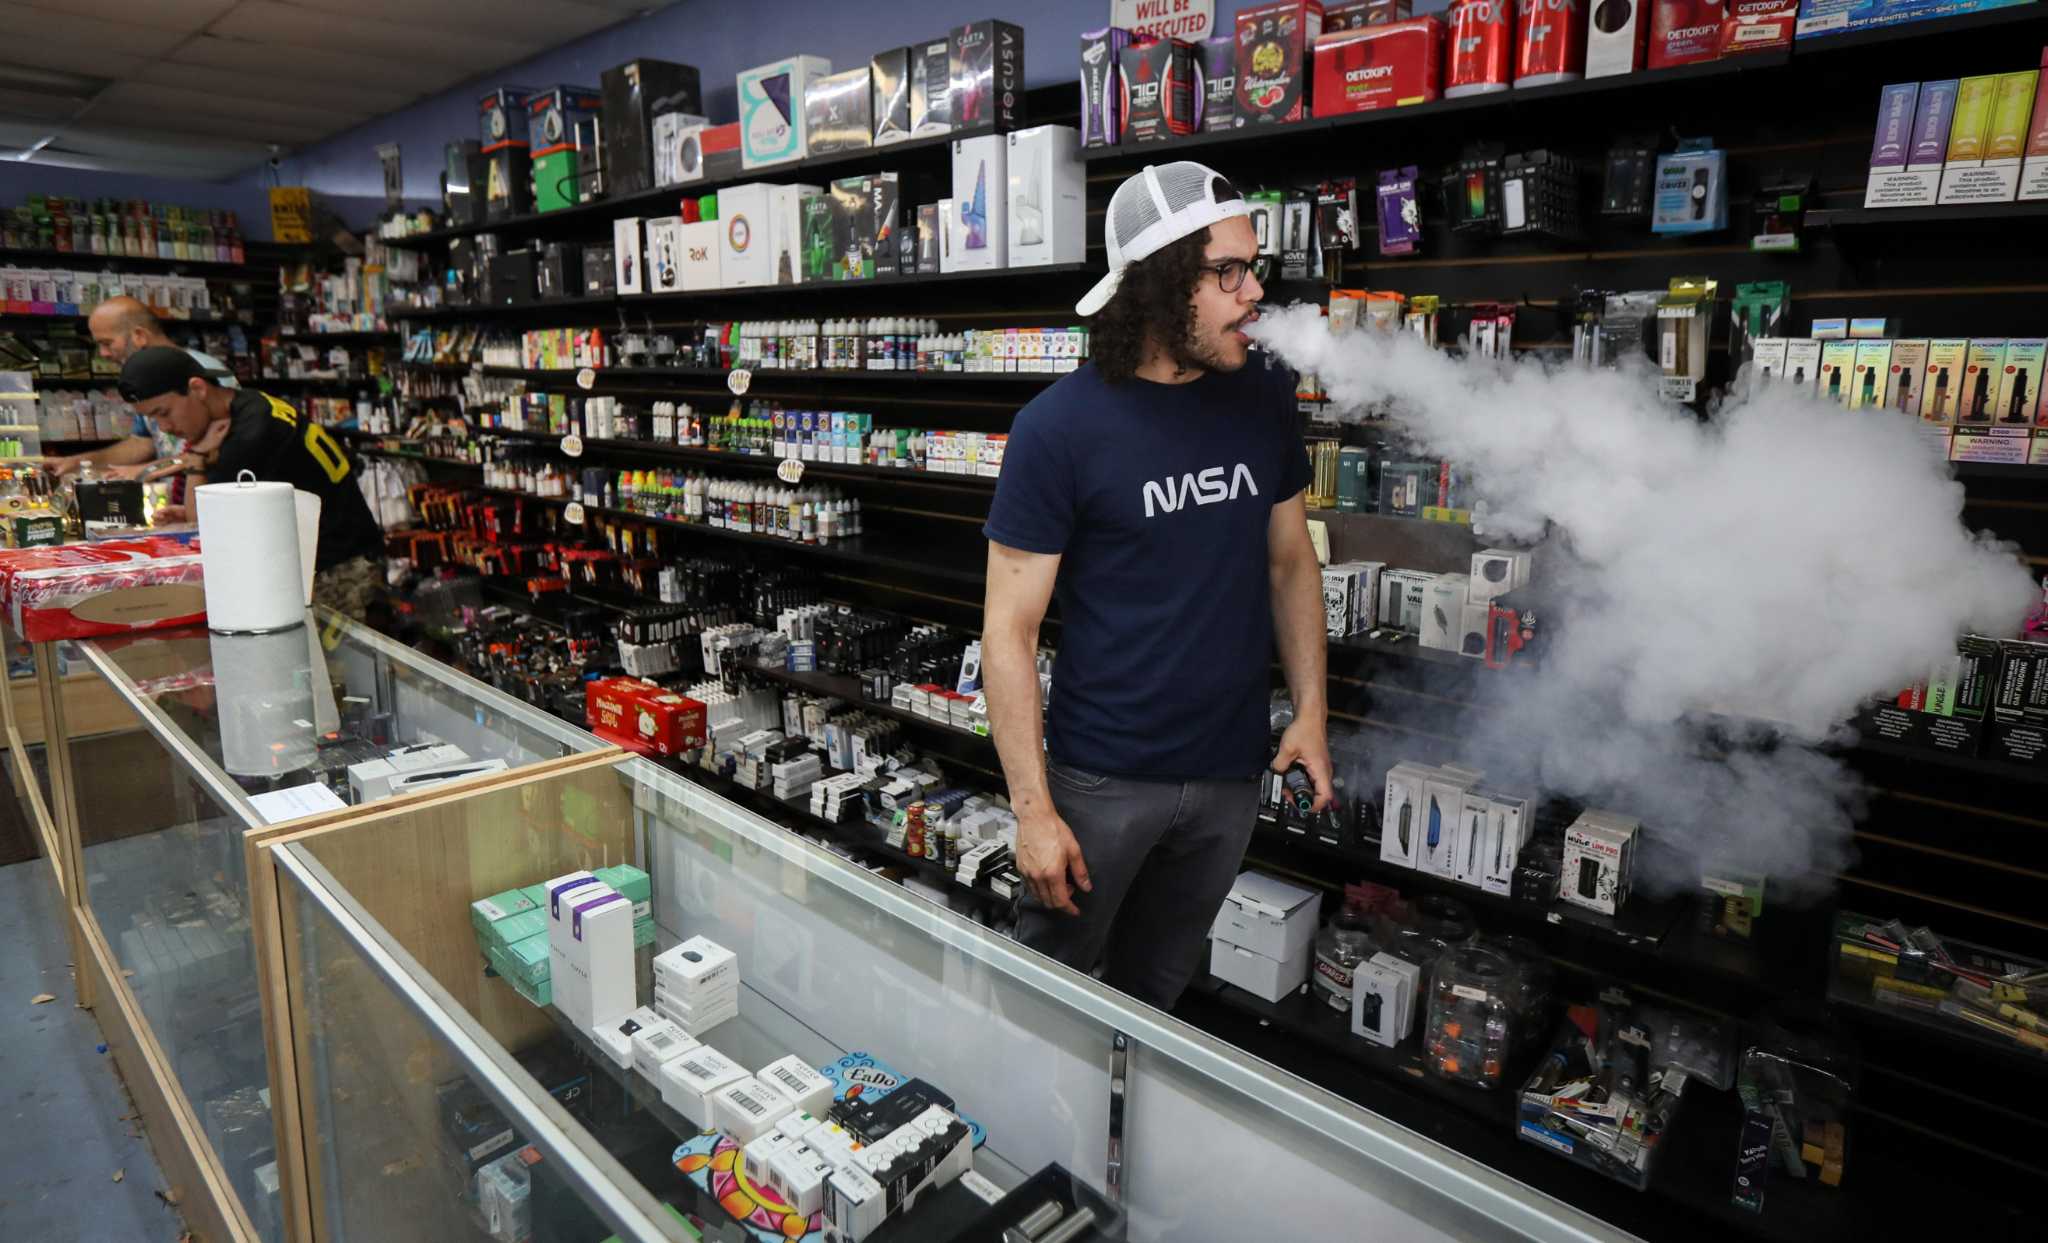 unanimously bans vaping, e-cigarettes in public spaces